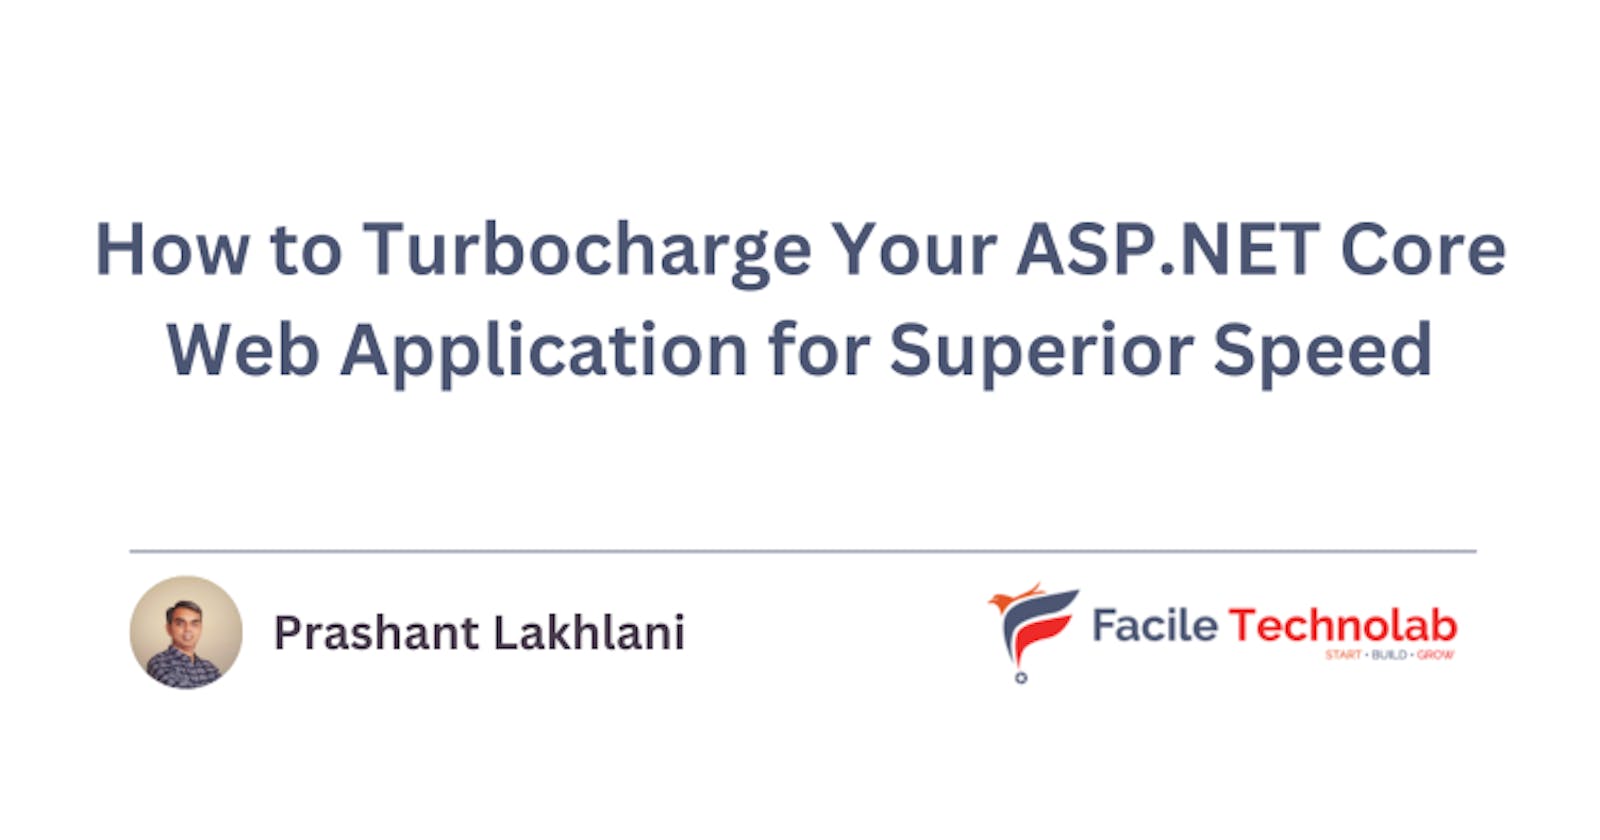 How to Turbocharge Your ASP.NET Core Web Application for Superior Speed